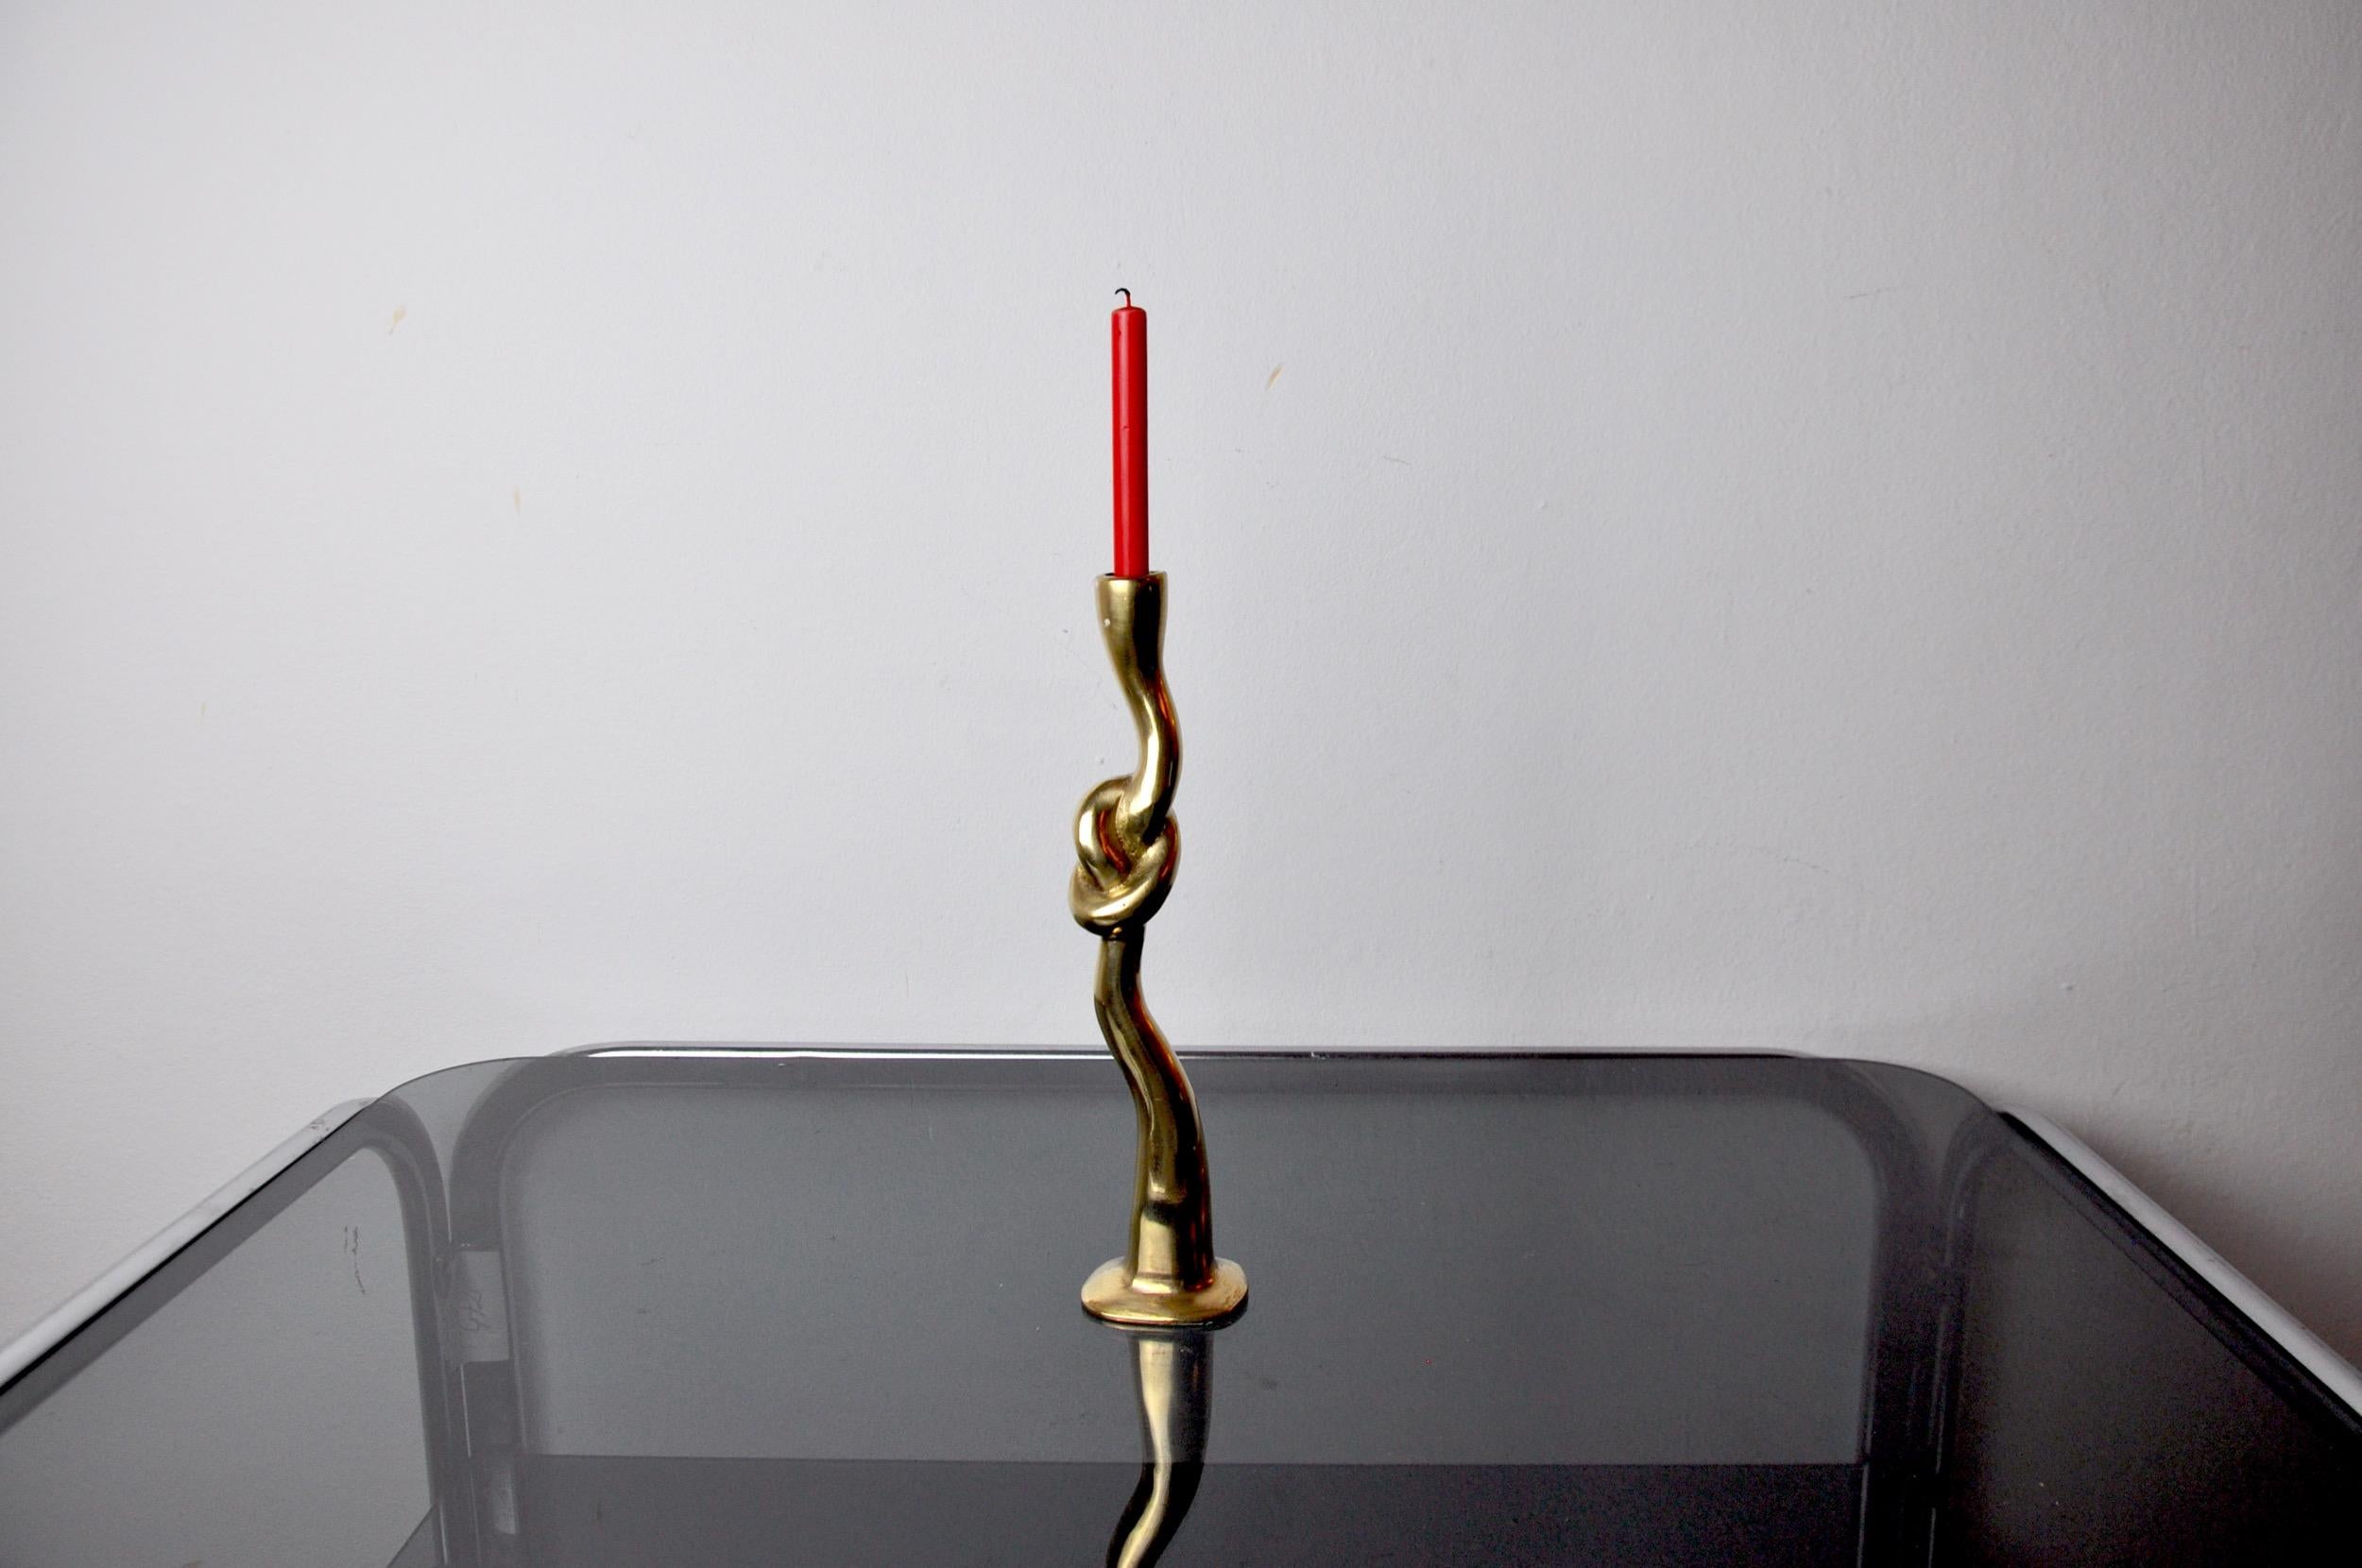 Superb and rare Brutalist knot-shaped candle holder, designed and produced in Italy in the 1970s.
Brass candle holder.
Beautiful decorative object that will bring a real design touch to your interior.
Very nice state of conservation.
Ref: 873.